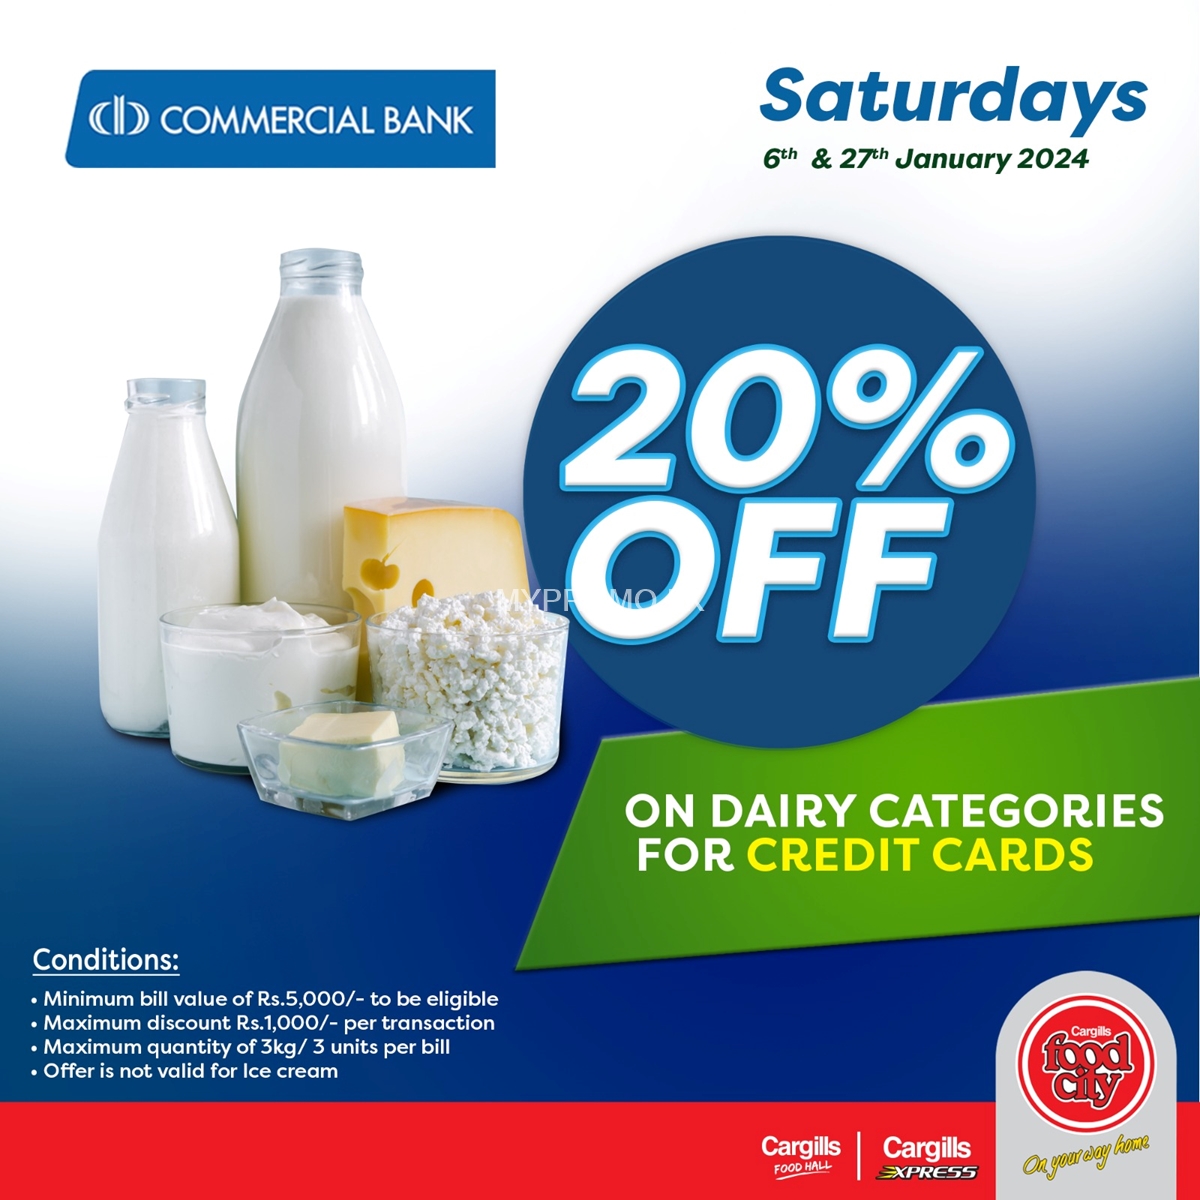 Get 20% aff at Cargills Food City with Commercial Bank Cards